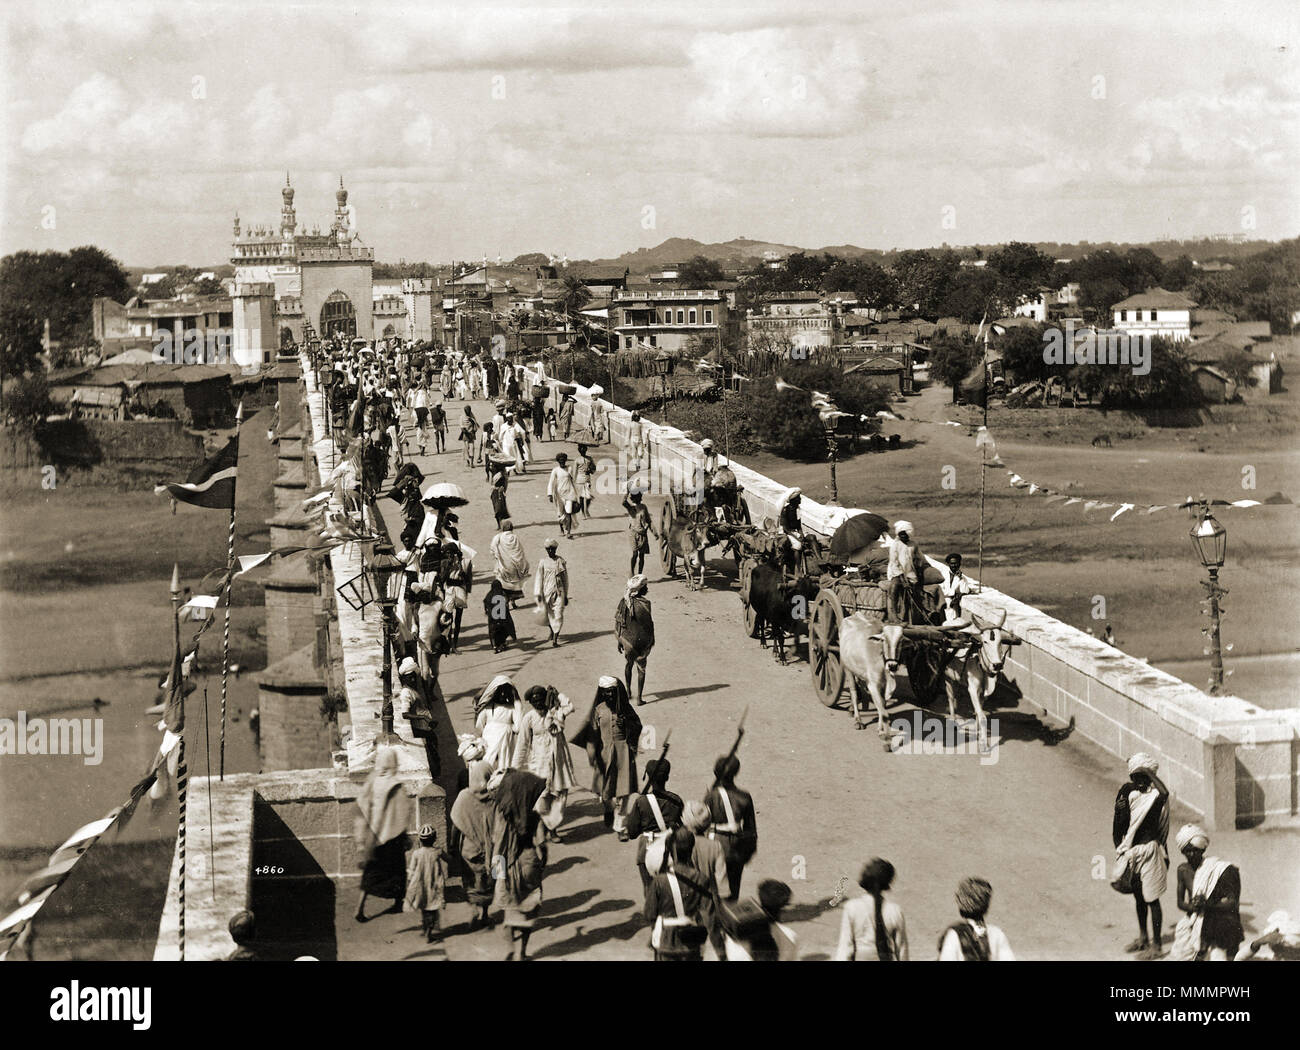 . Photograph of the entrance bridge to the city of Hyderabad, Andhra Pradesh, from the Curzon Collection: 'Views of HH the Nizam's Dominions, Hyderabad, Deccan, 1892'.  . 1880s.   Lala Deen Dayal  (1844–1905)     Alternative names Raja Deen Dayal  Description Indian photographer  Date of birth/death 1844 5 July 1905  Location of birth/death Sardhana Mumbai  Authority control  : Q1182338 VIAF:?94369161 ISNI:?0000 0000 8166 9953 ULAN:?500037191 LCCN:?n79141503 GND:?129514721 WorldCat Entrance bridge to Hyderabad, India Stock Photo